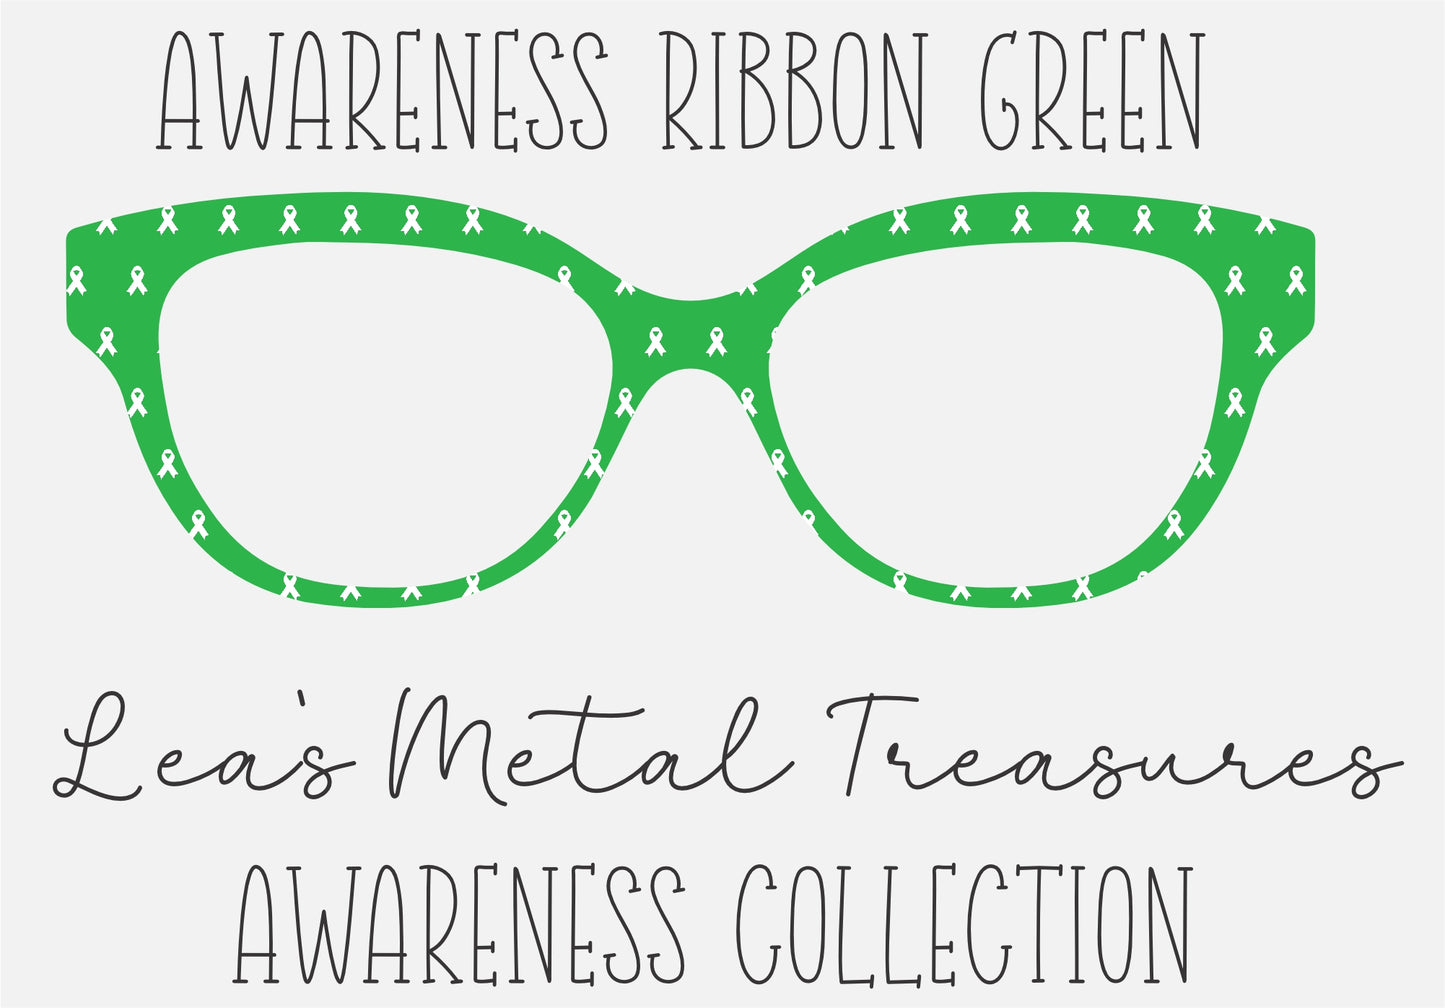 AWARENESS RIBBON GREEN Eyewear Frame Toppers COMES WITH MAGNETS